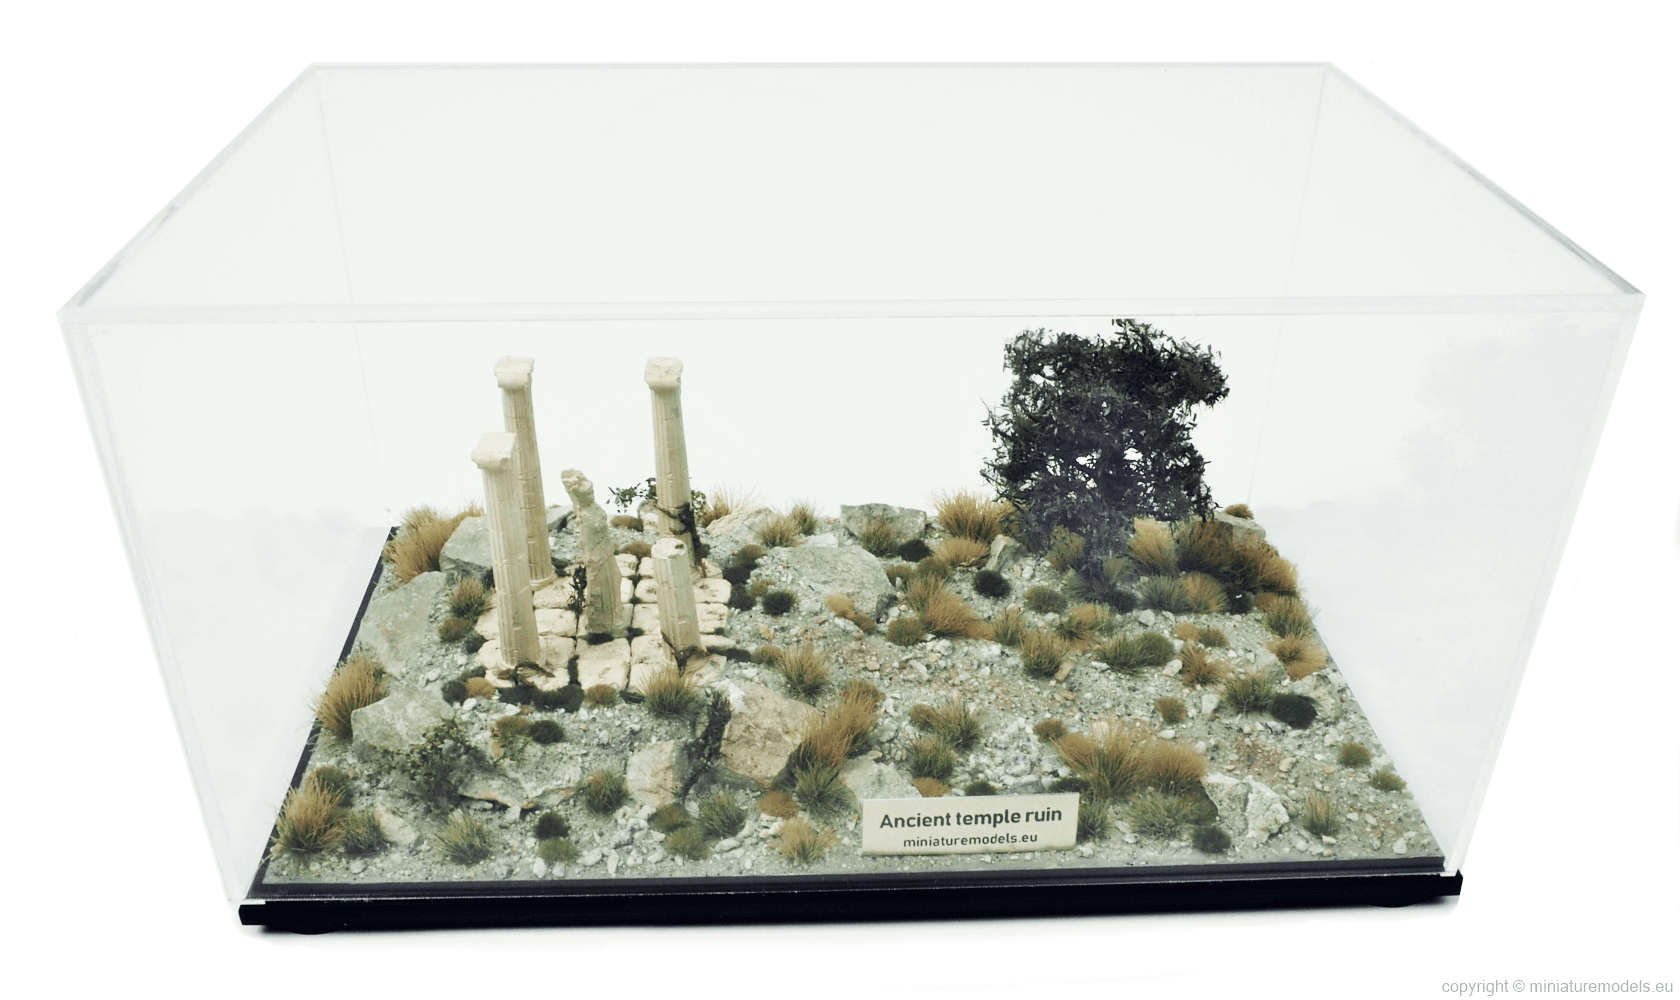 Model of ancient temple ruin in acrylic glass showcase